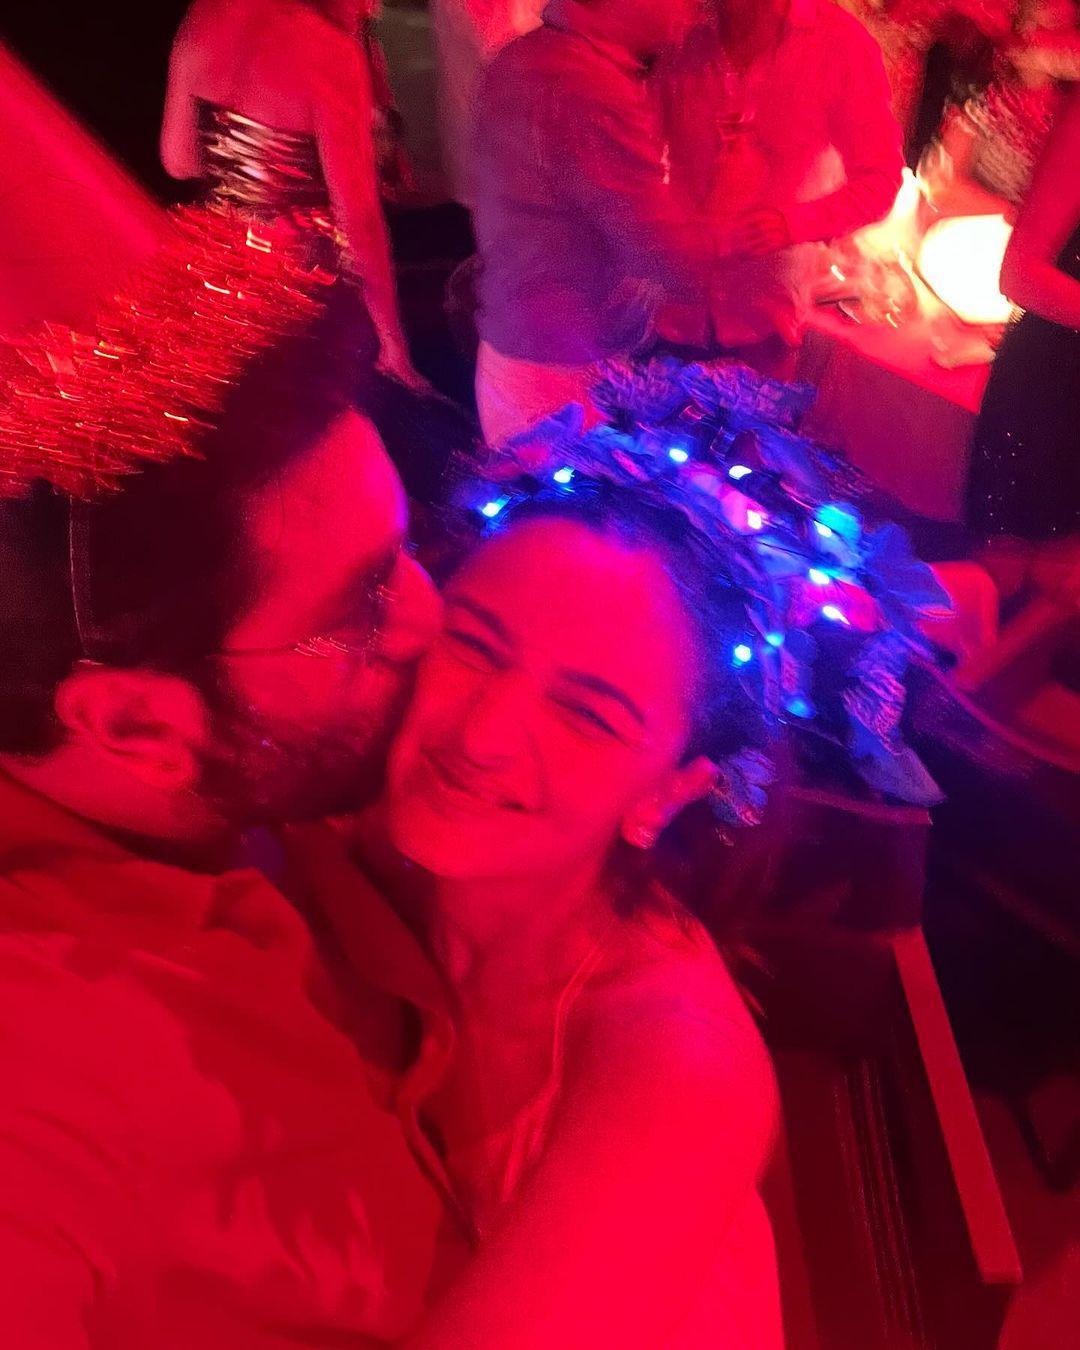 Alia Bhatt has recently posted a set of pictures on her social media account, revealing how she started the new year. One of the pictures shows Ranbir Kapoor giving a peck on Alia's cheeks, and it's absolutely adorable